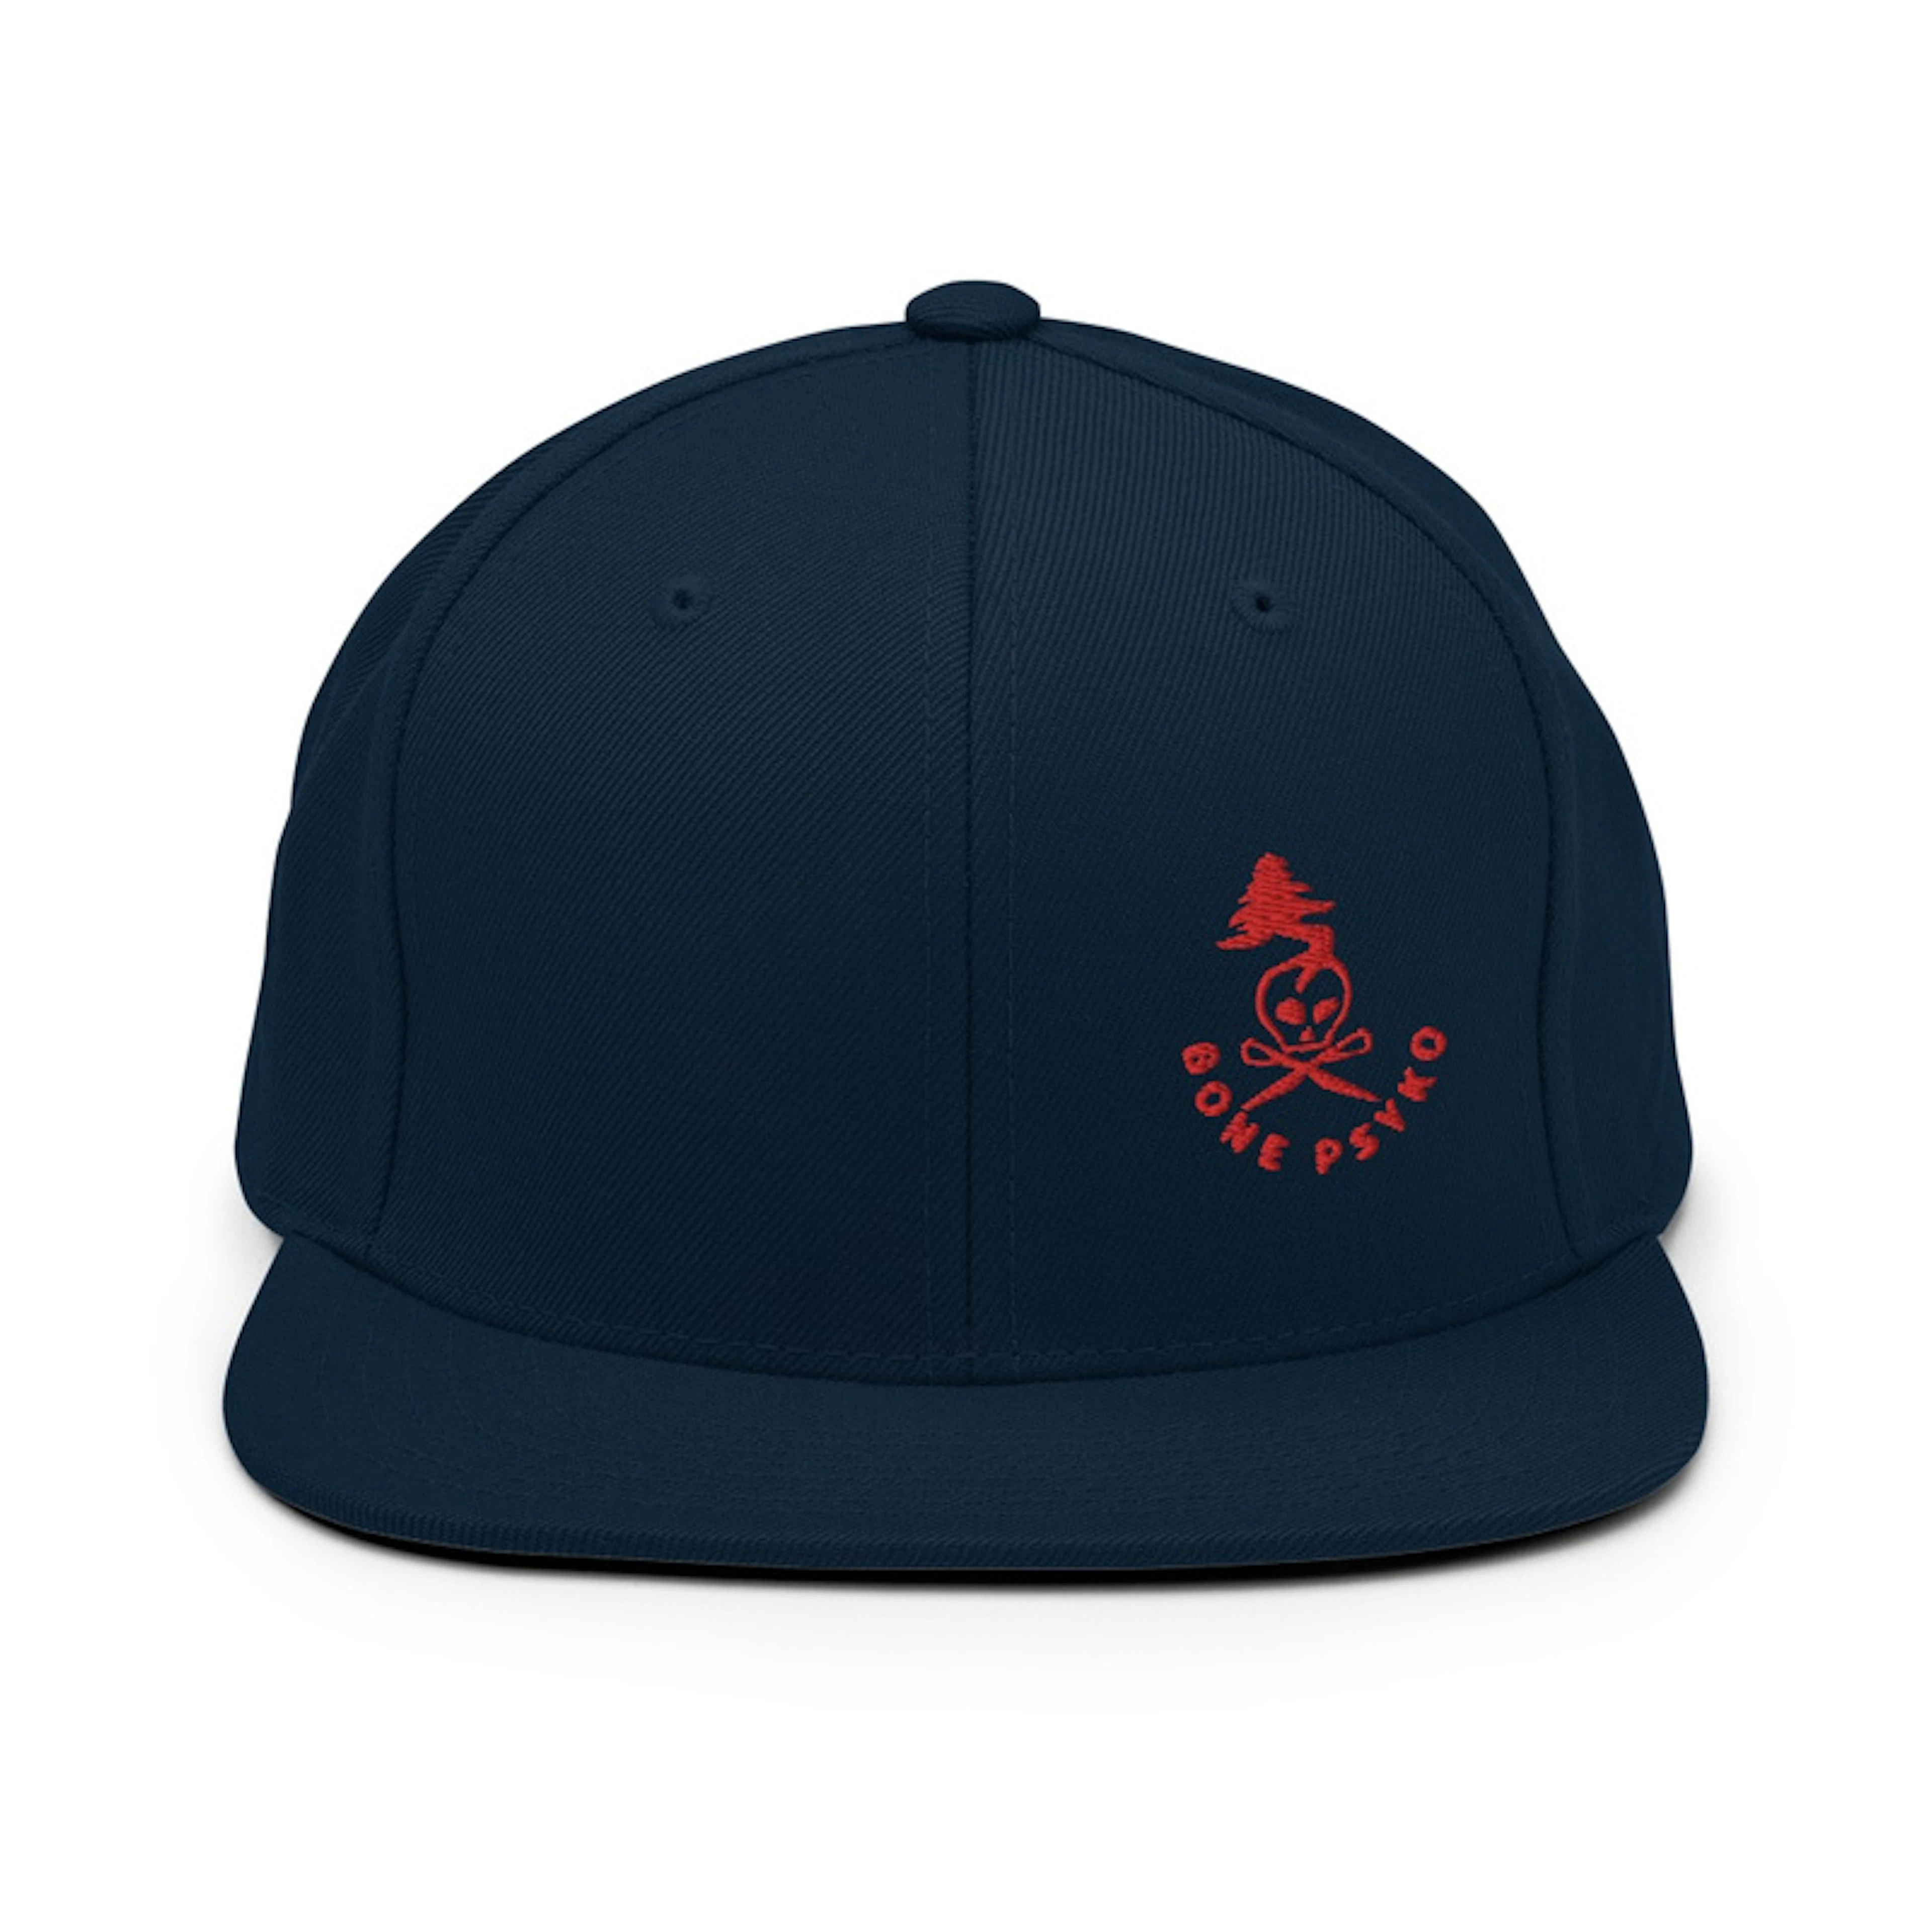 Snapback hat with red logo